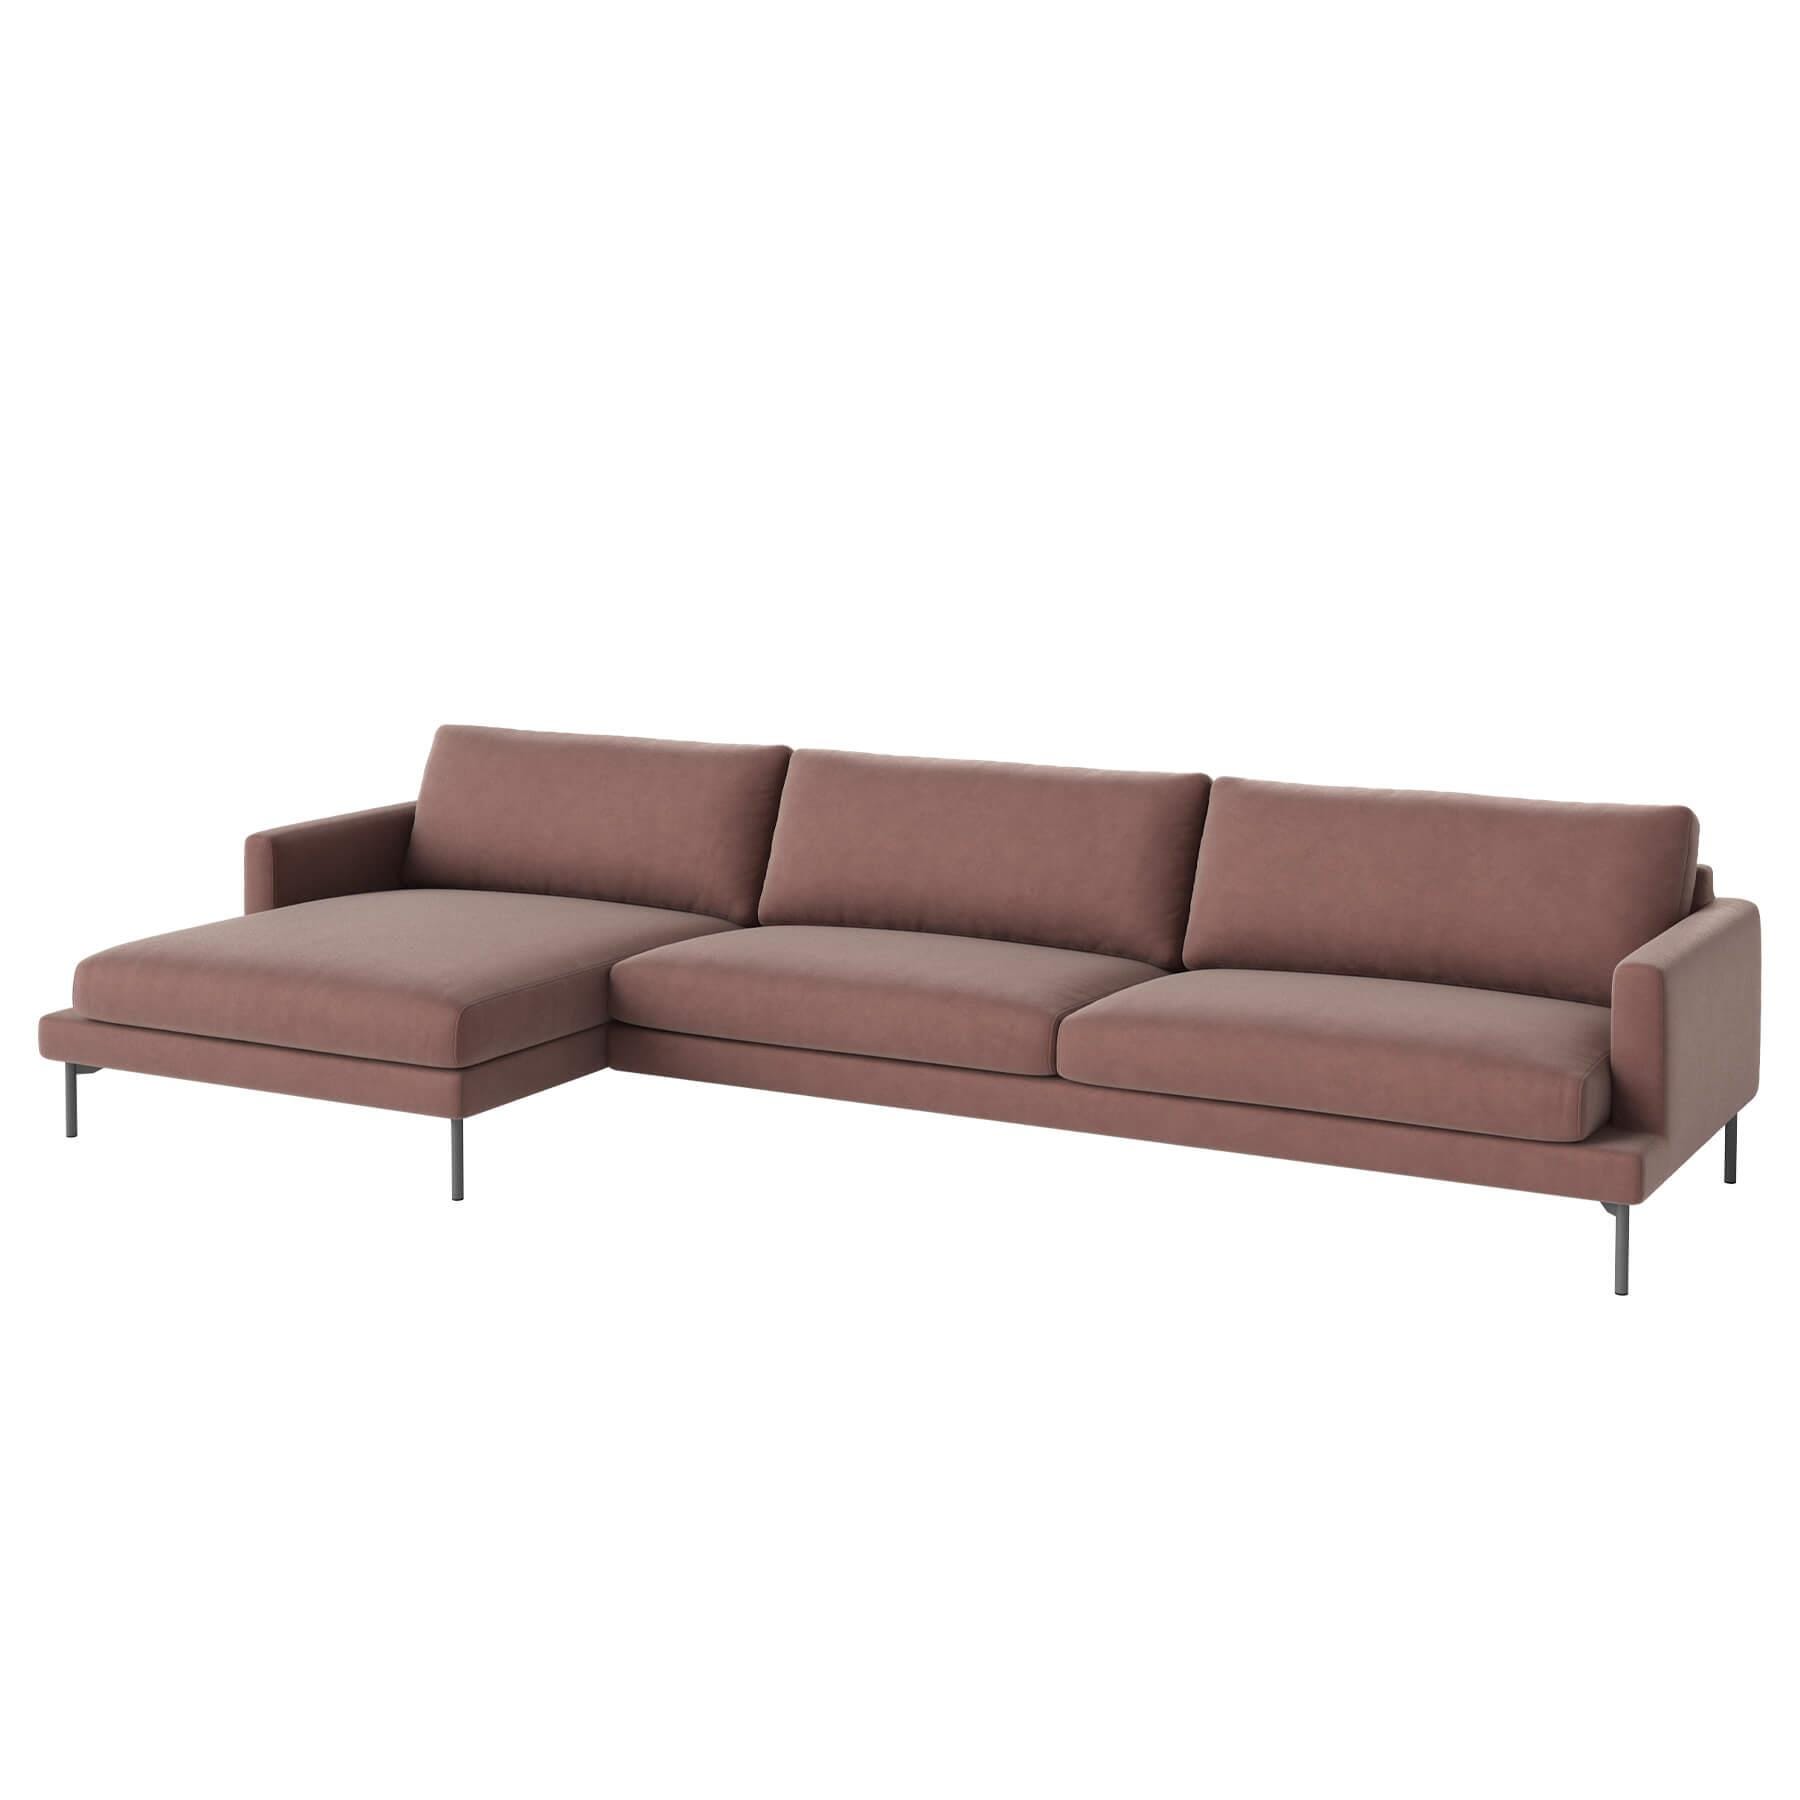 Bolia Veneda Sofa 45 Seater Sofa With Chaise Longue Grey Laquered Steel Ritz Light Rosa Left Pink Designer Furniture From Holloways Of Ludlow